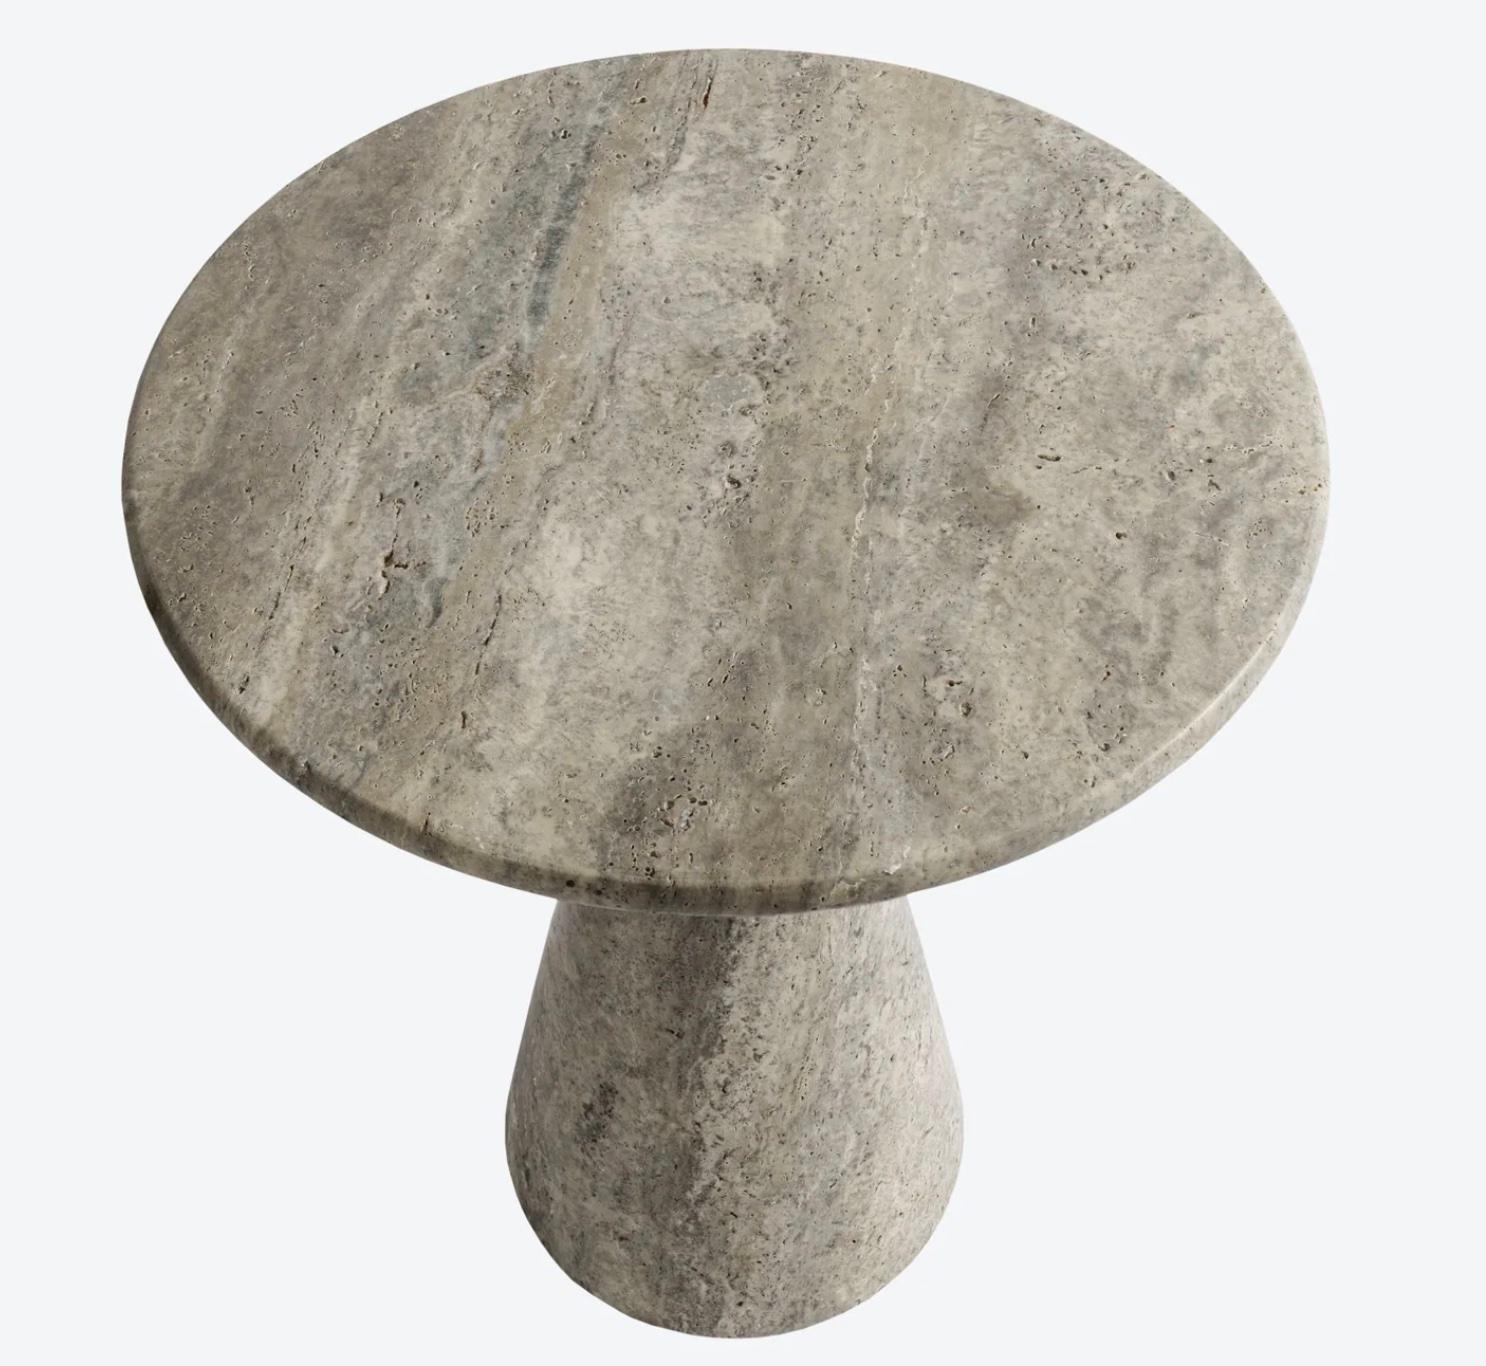 Our most versatile side table made of silver travertine. A simple elegant shape carved from a solid block of stone. This occasional stone table can be used virtually anywhere - next to a sofa, chair, bed, or bath. Sold individually, but can easily